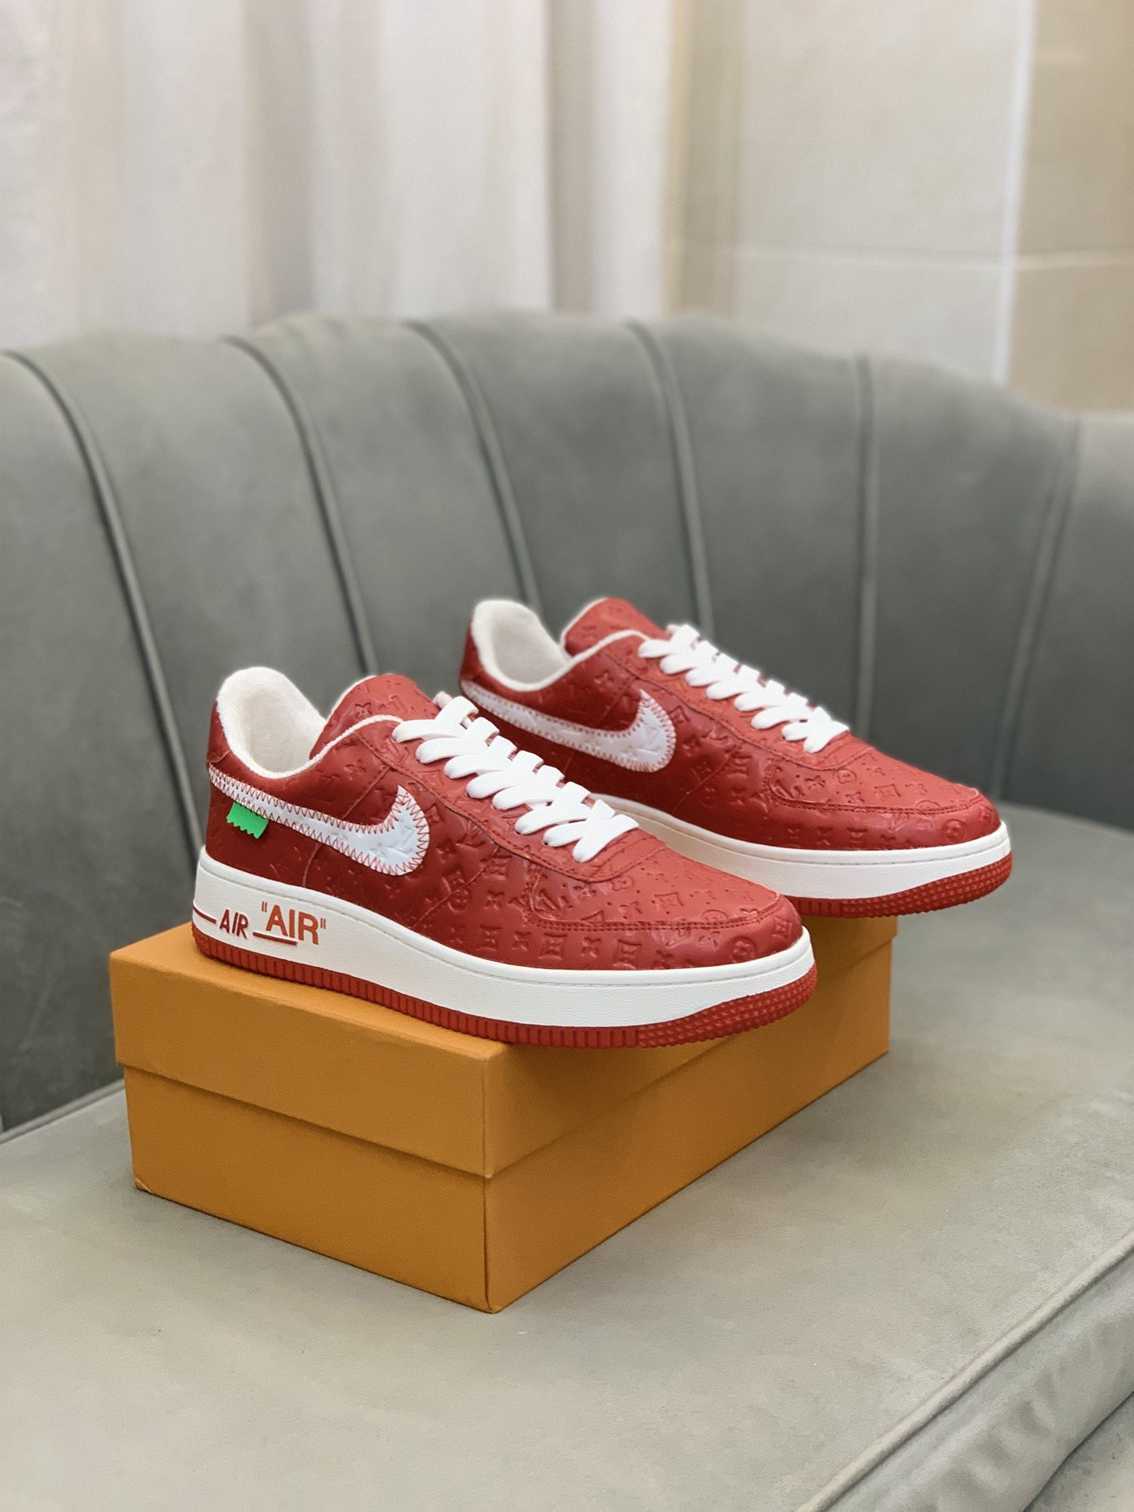 Air Force One X Louis Vuitton Sneaker For Men in 259522, cheap Air Force one, only $89!